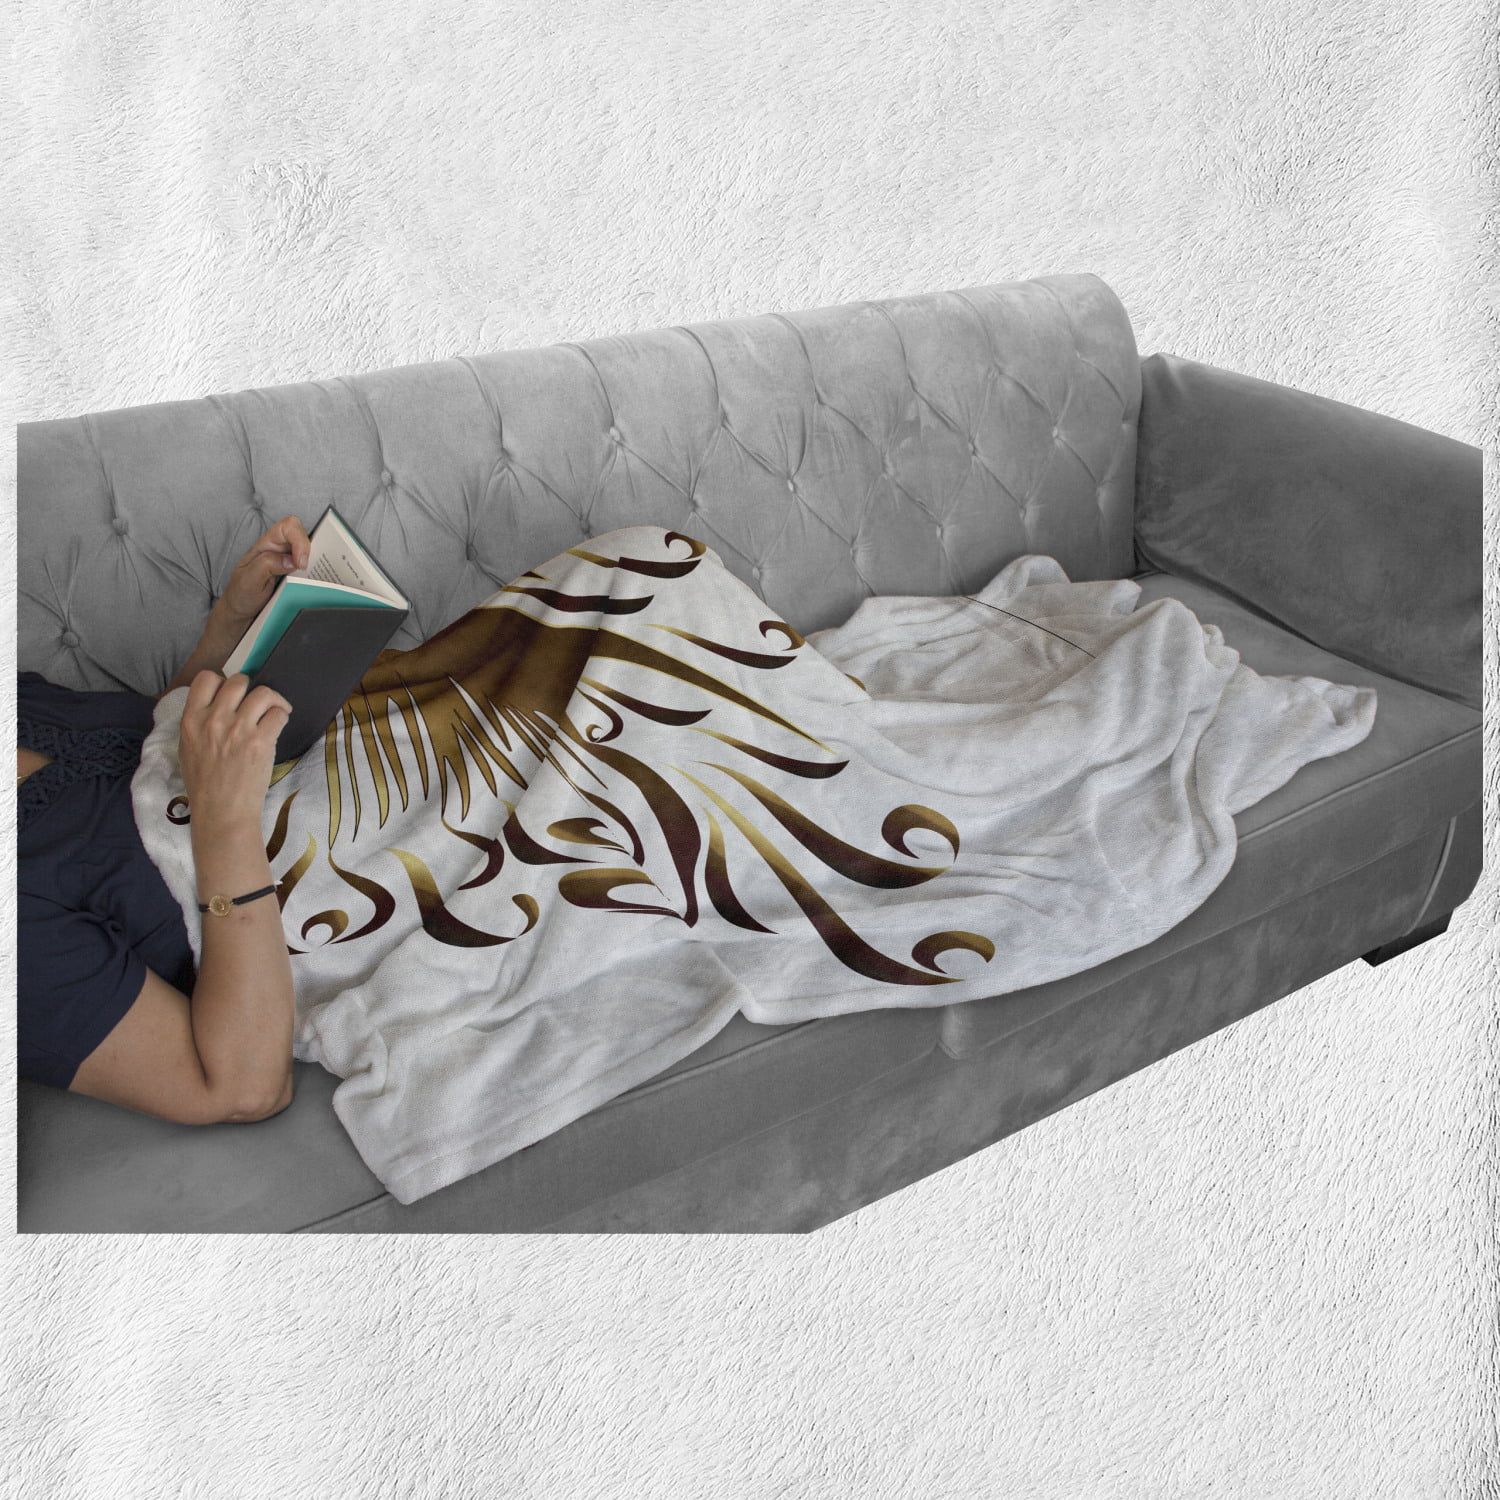 Cozy Plush for Indoor and Outdoor Use 50 x 70 Brown White Art Design Half Outline Drawing with Swirly Mane Horse Graphic on Plain Backdrop Ambesonne Animal Soft Flannel Fleece Throw Blanket 